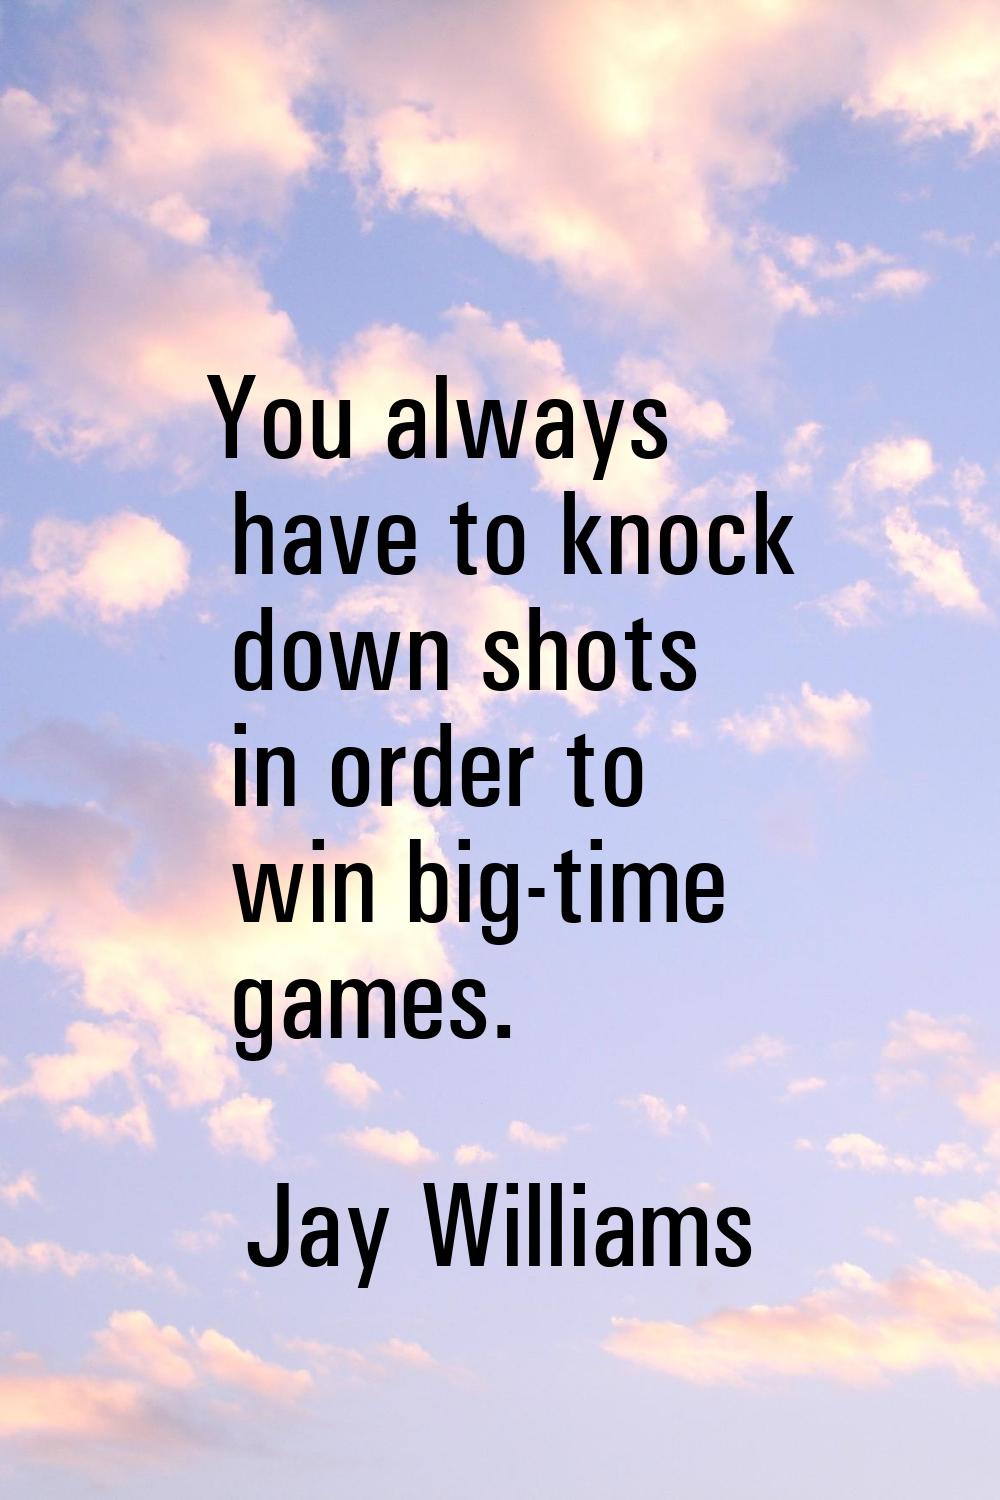 You always have to knock down shots in order to win big-time games.